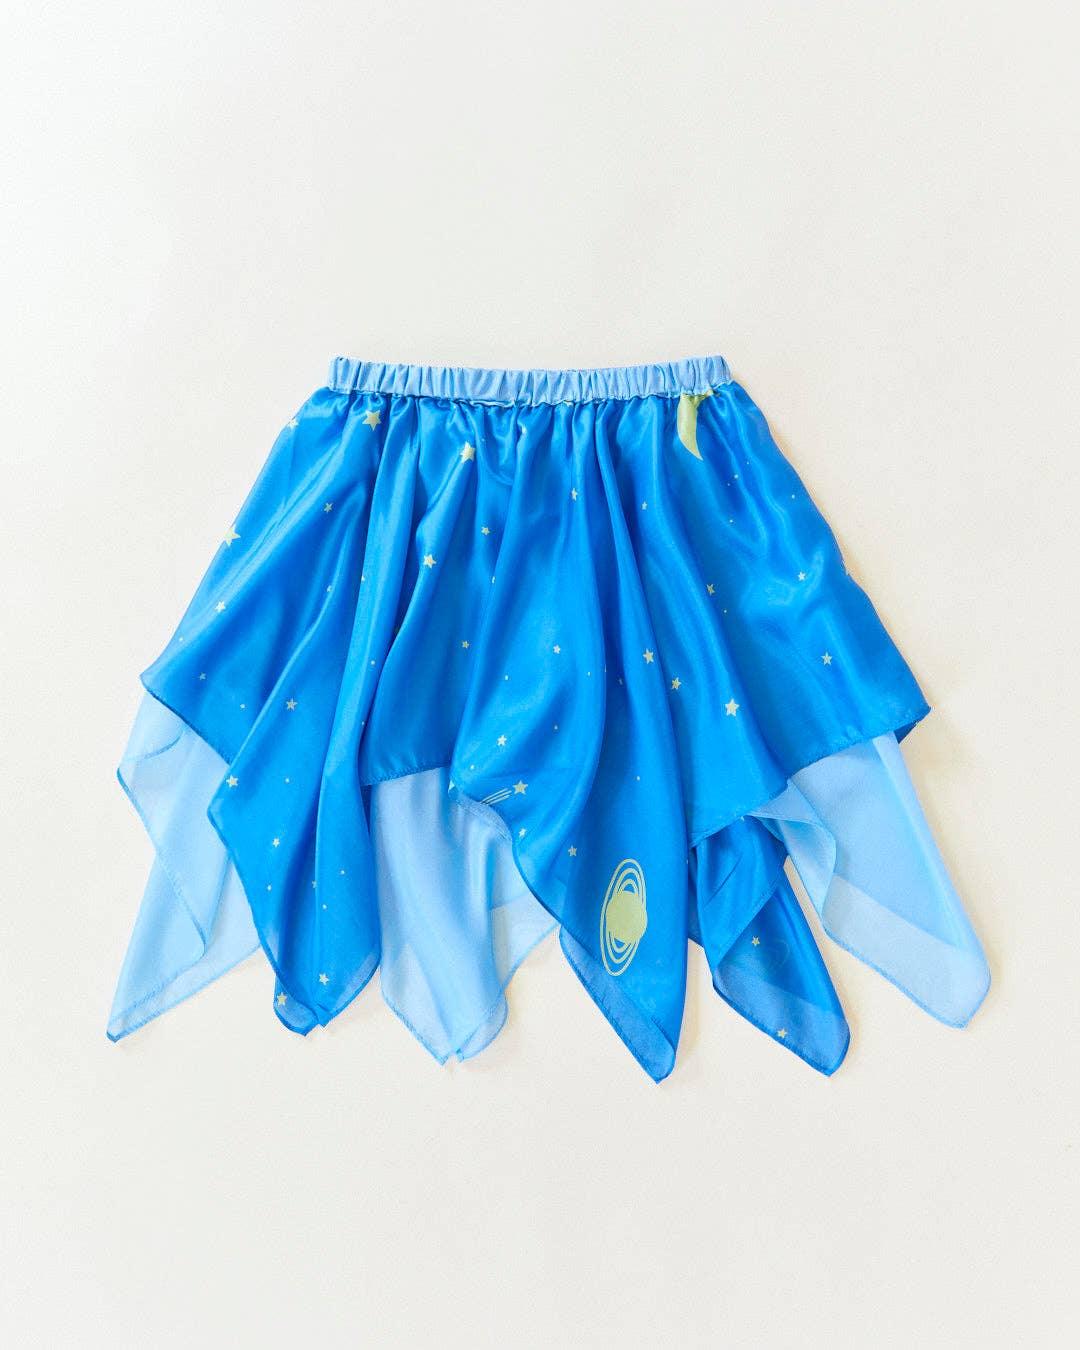 Fairy Skirt - 100% Silk Dress-Up for Pretend Play - Why and Whale